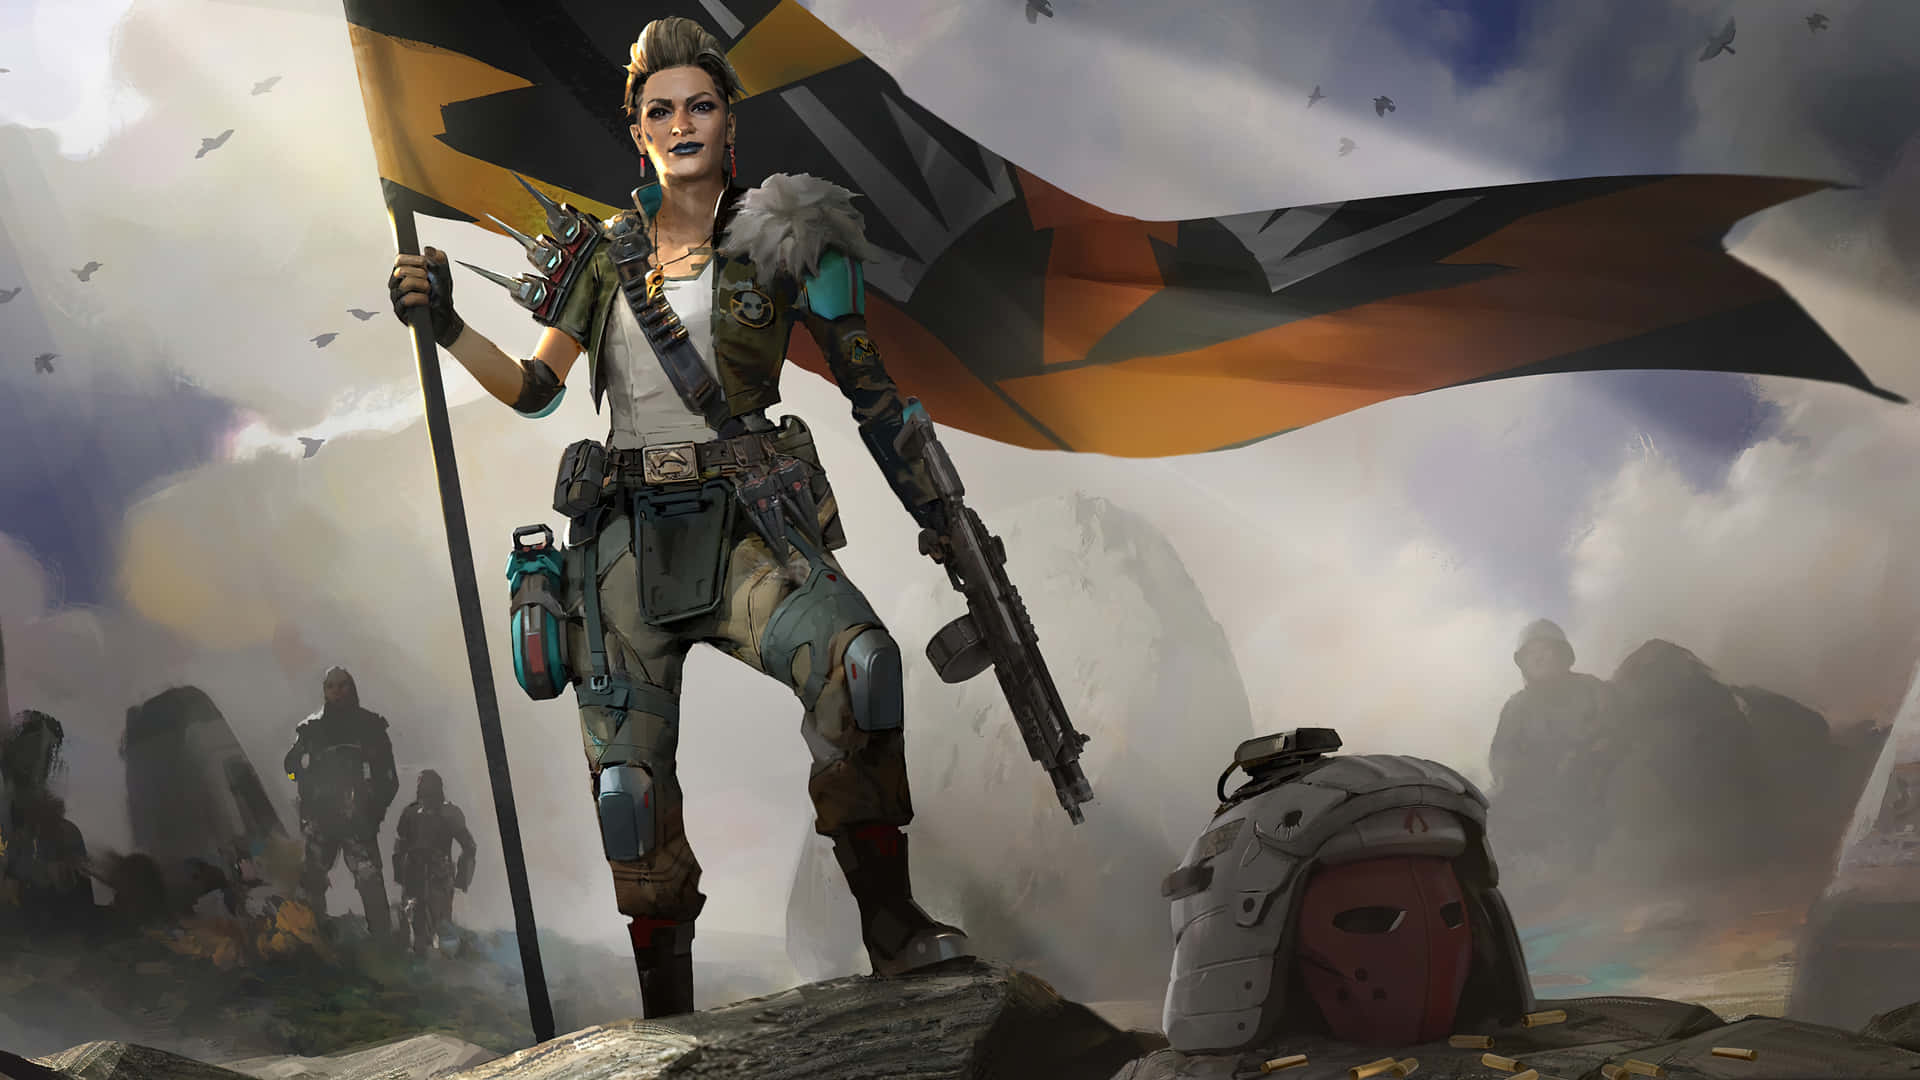 Apex Legends - Meet the Roster of Heroes in High Resolution Wallpaper